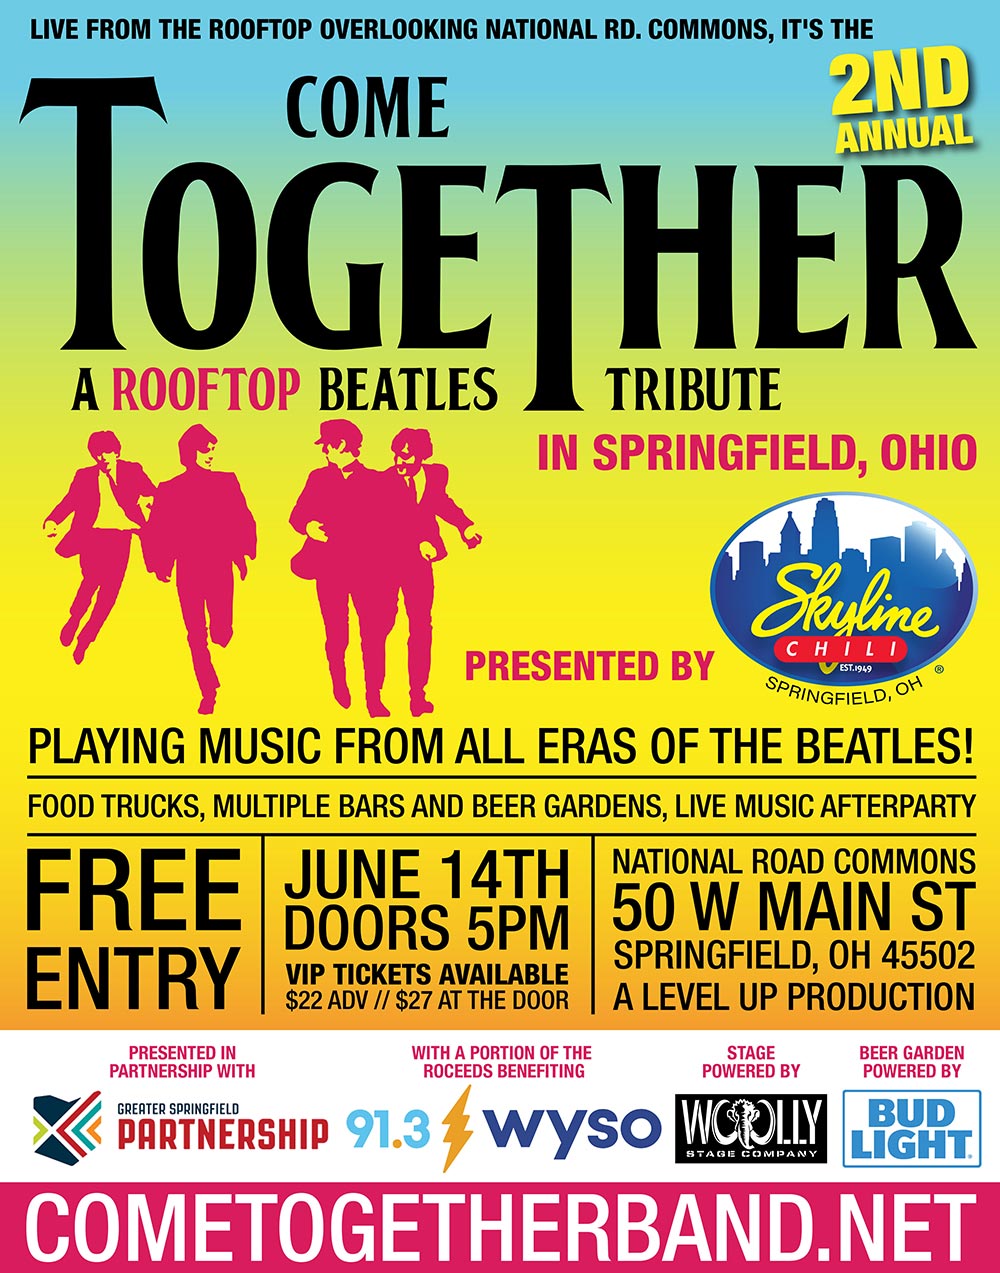 Come Together A rooftop Beatles Tribute, June 15, 5pm doors open